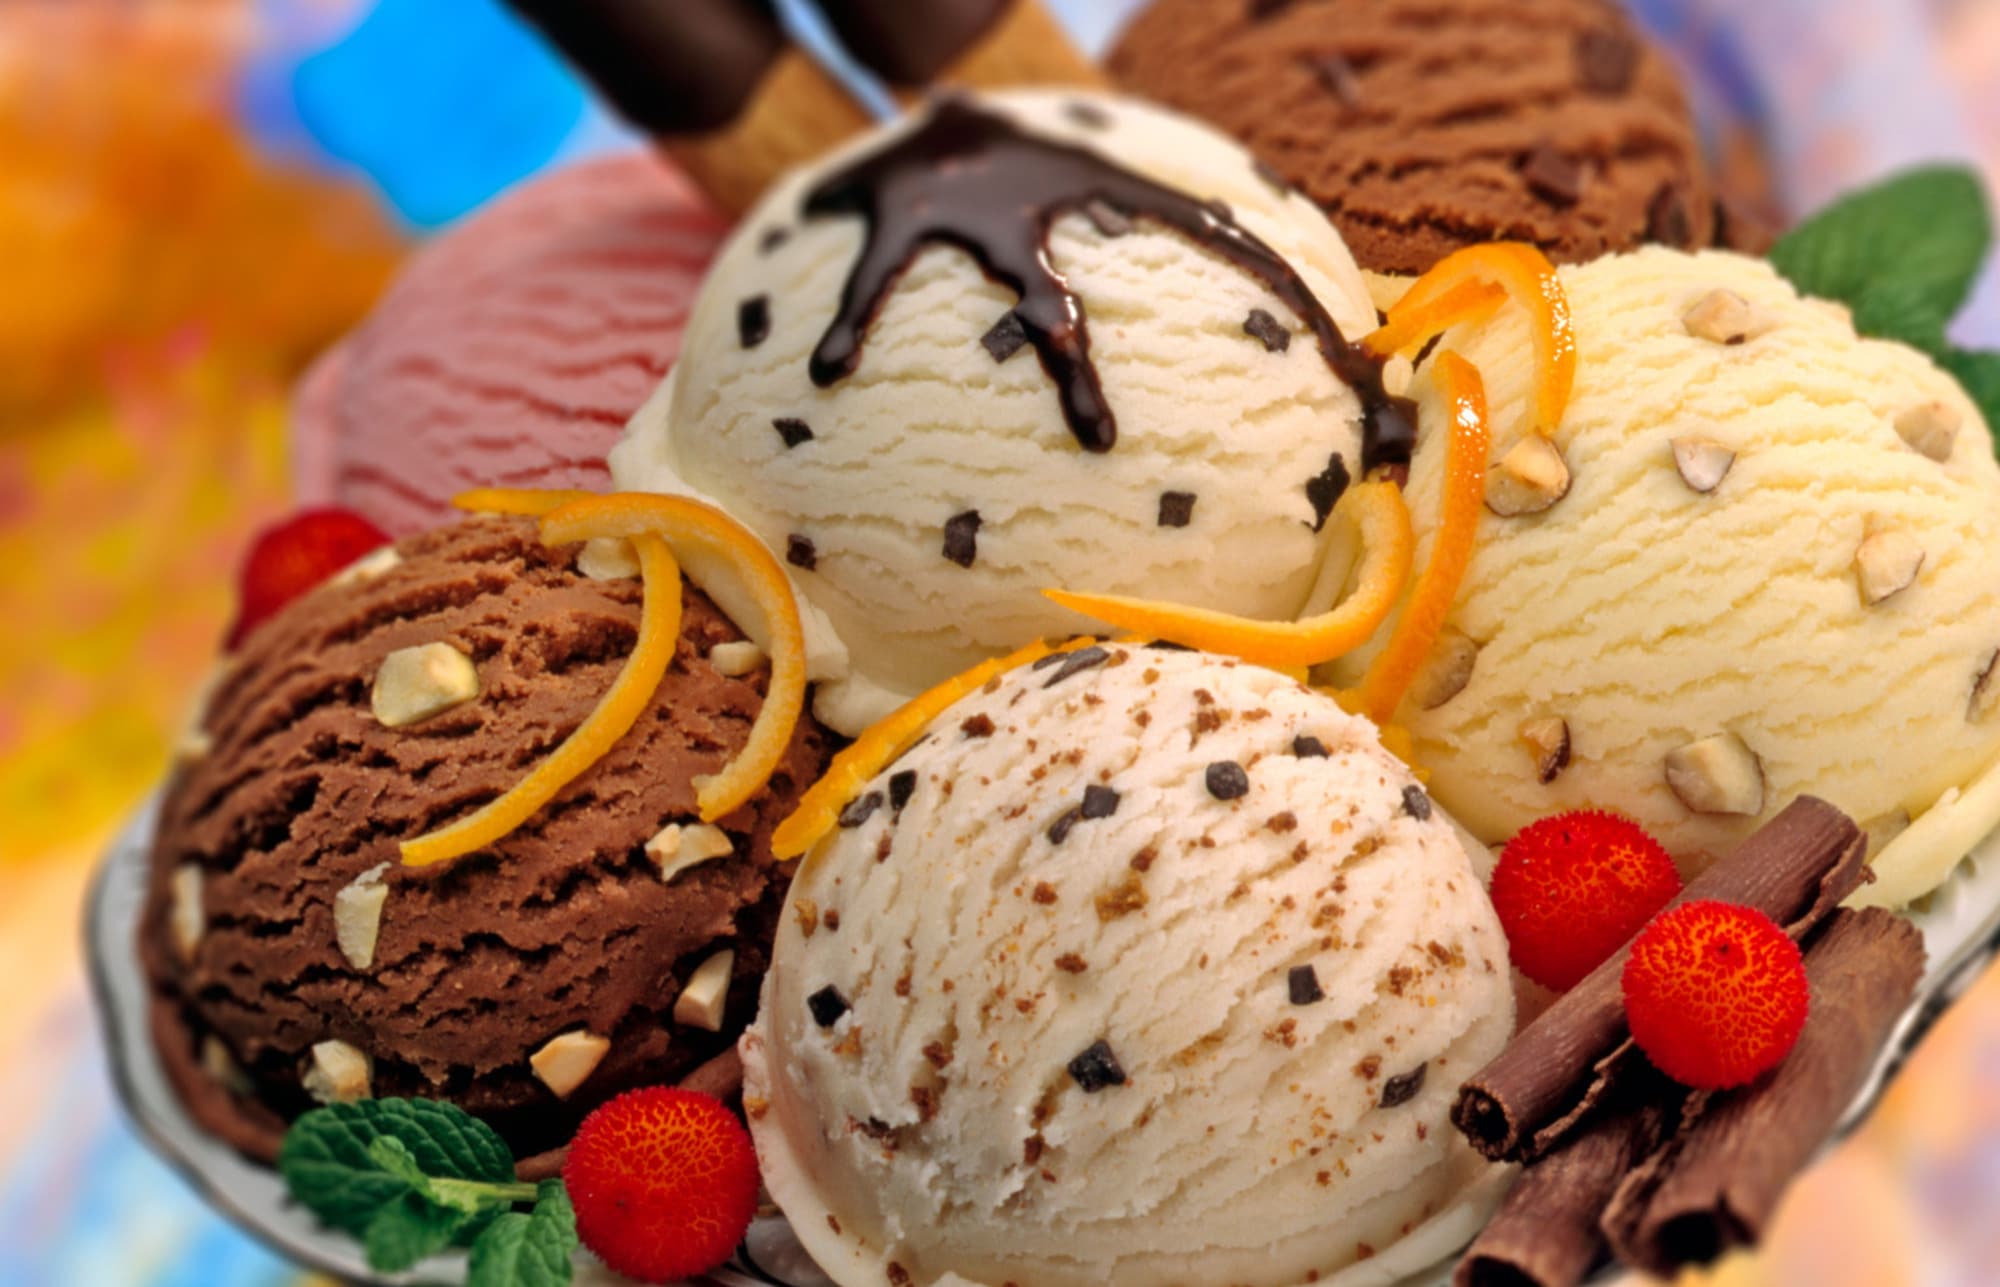 align-thoughts-is ice cream junk food